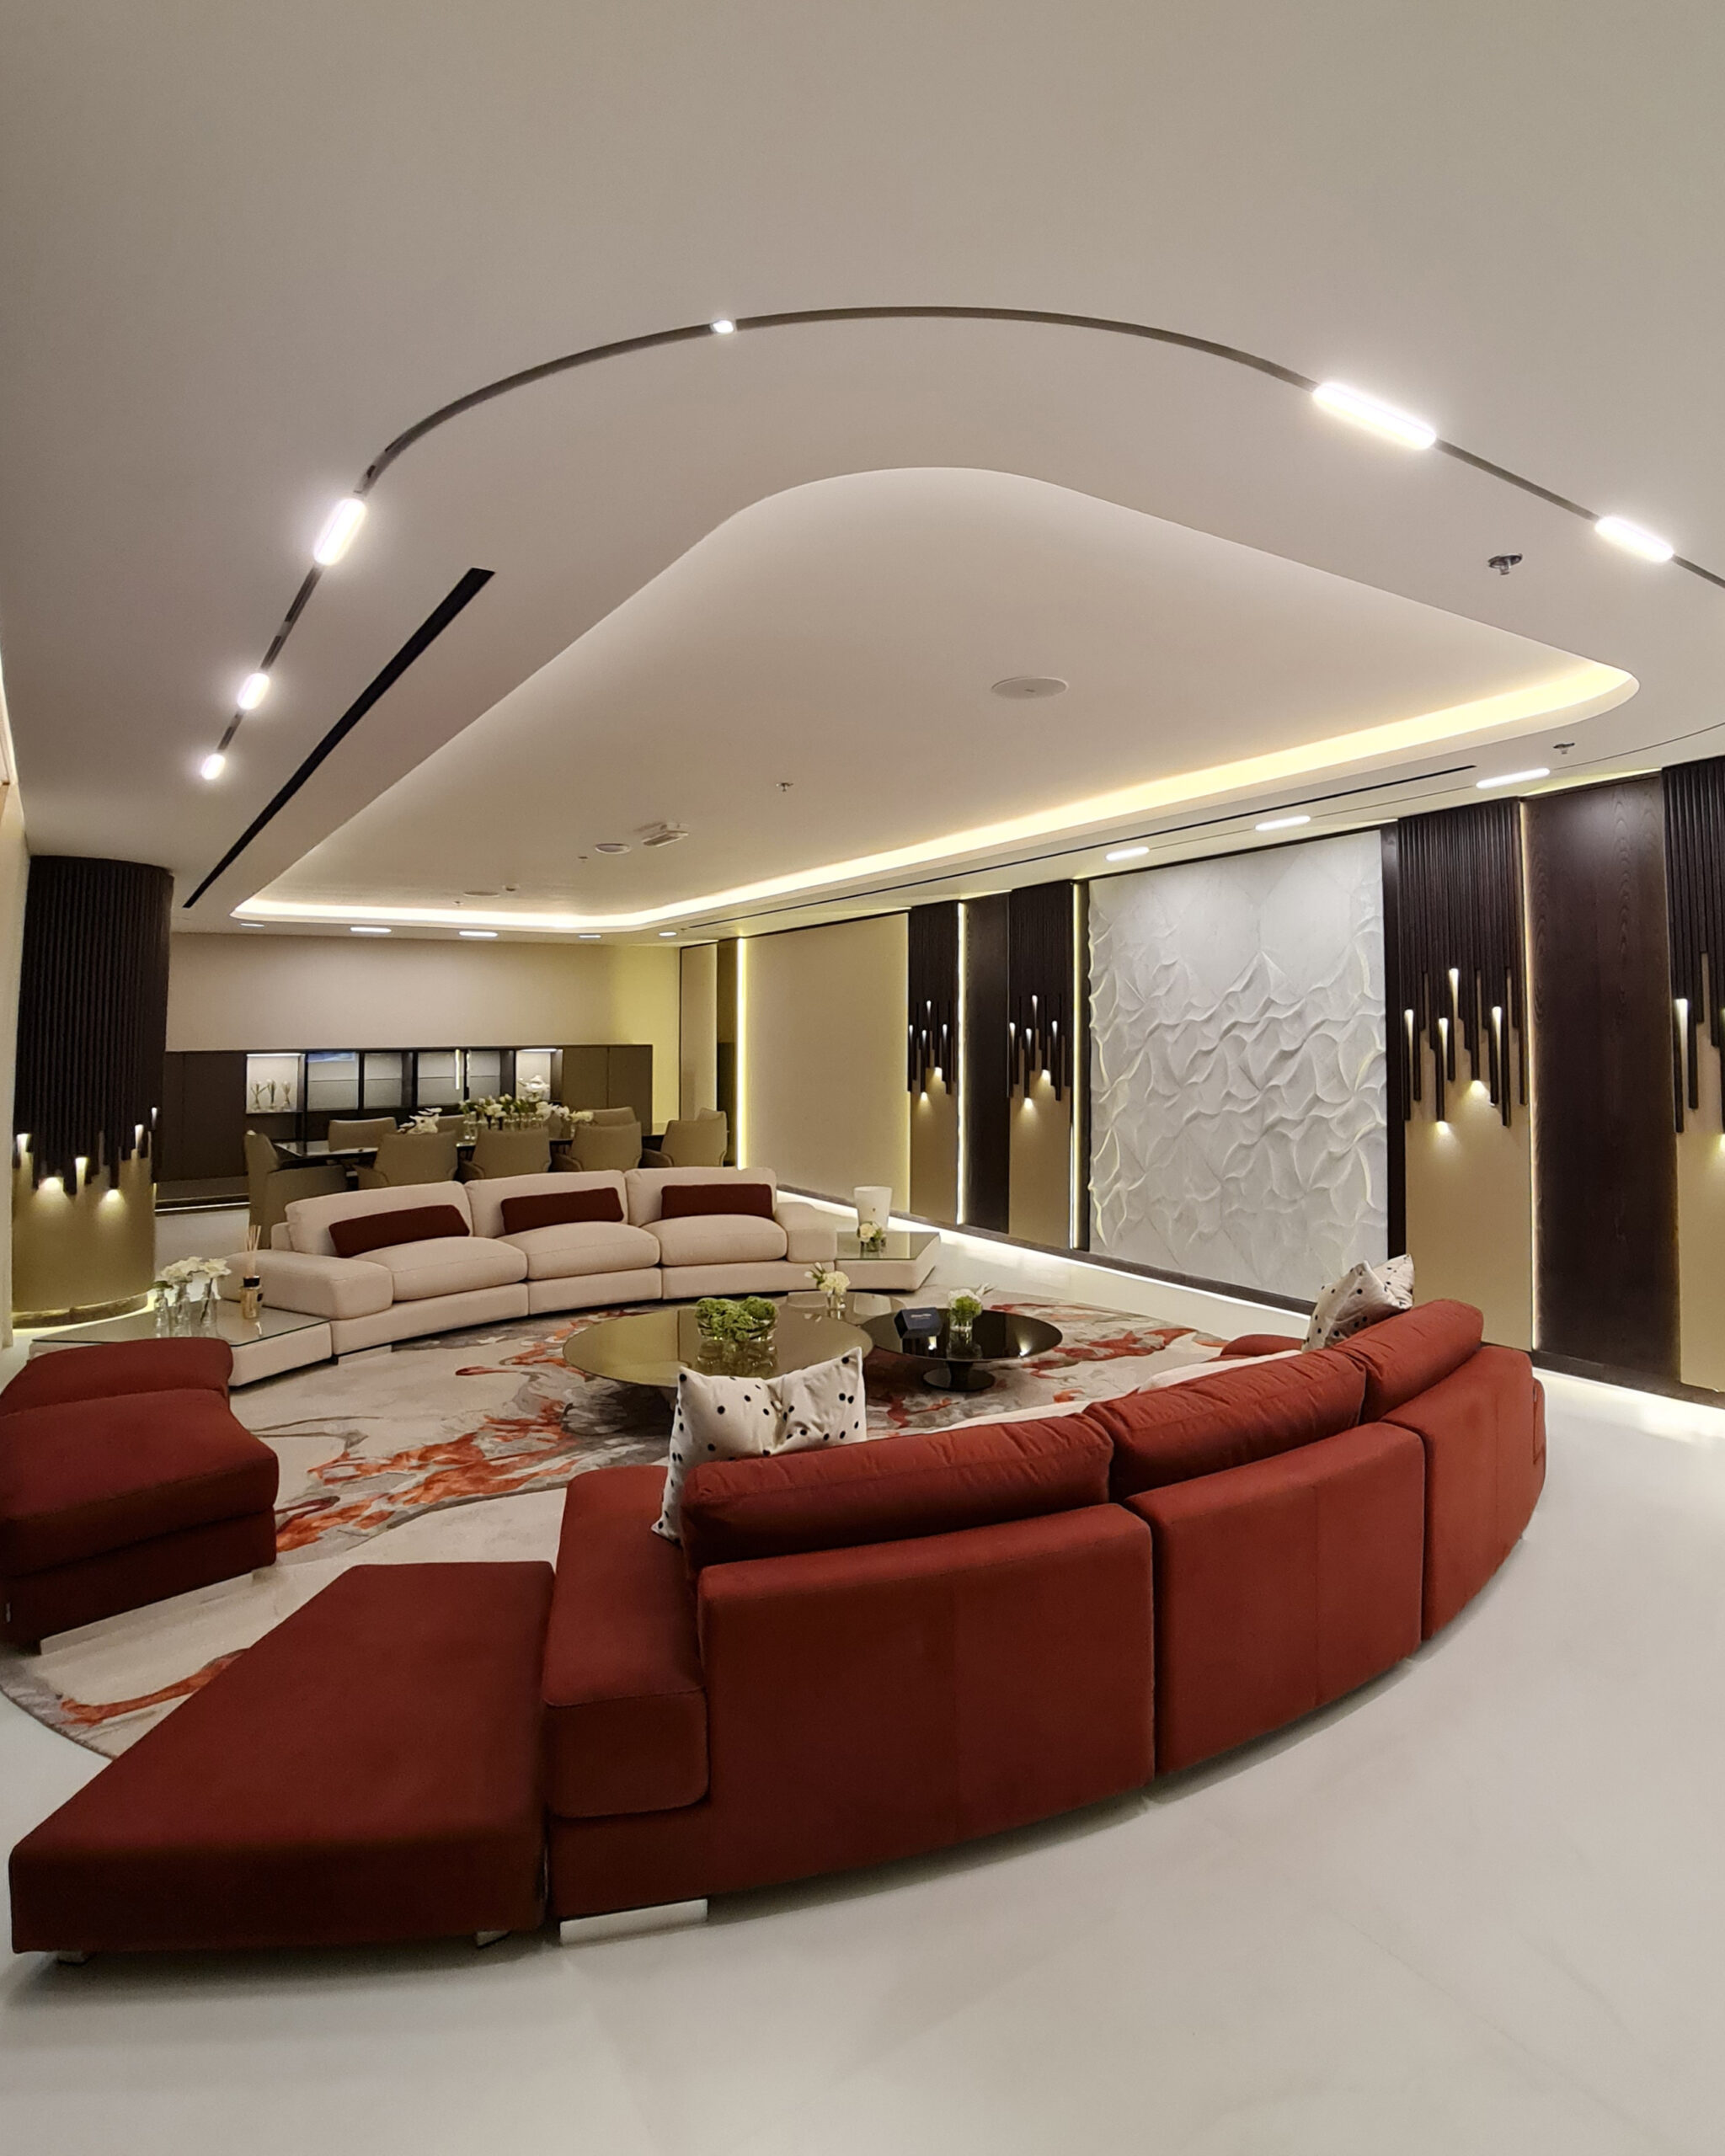 How Turnkey Interior Solutions Streamline Your Design Dreams